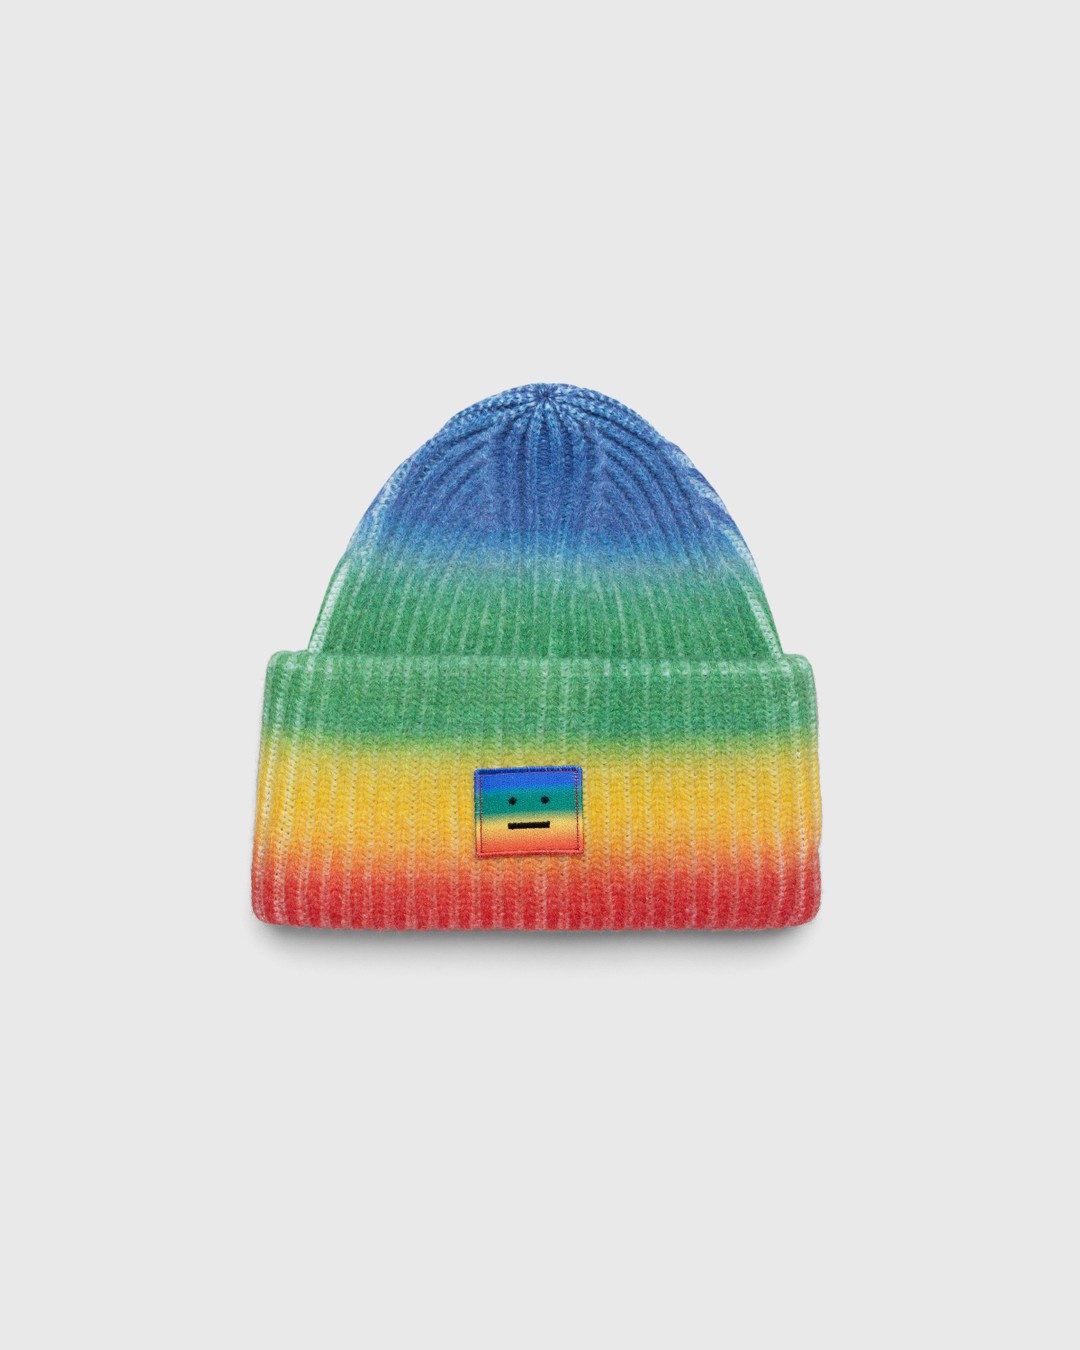 Acne Studios – Knit Face Patch Beanie Coral Red/Green - Beanies - Multi - Image 1